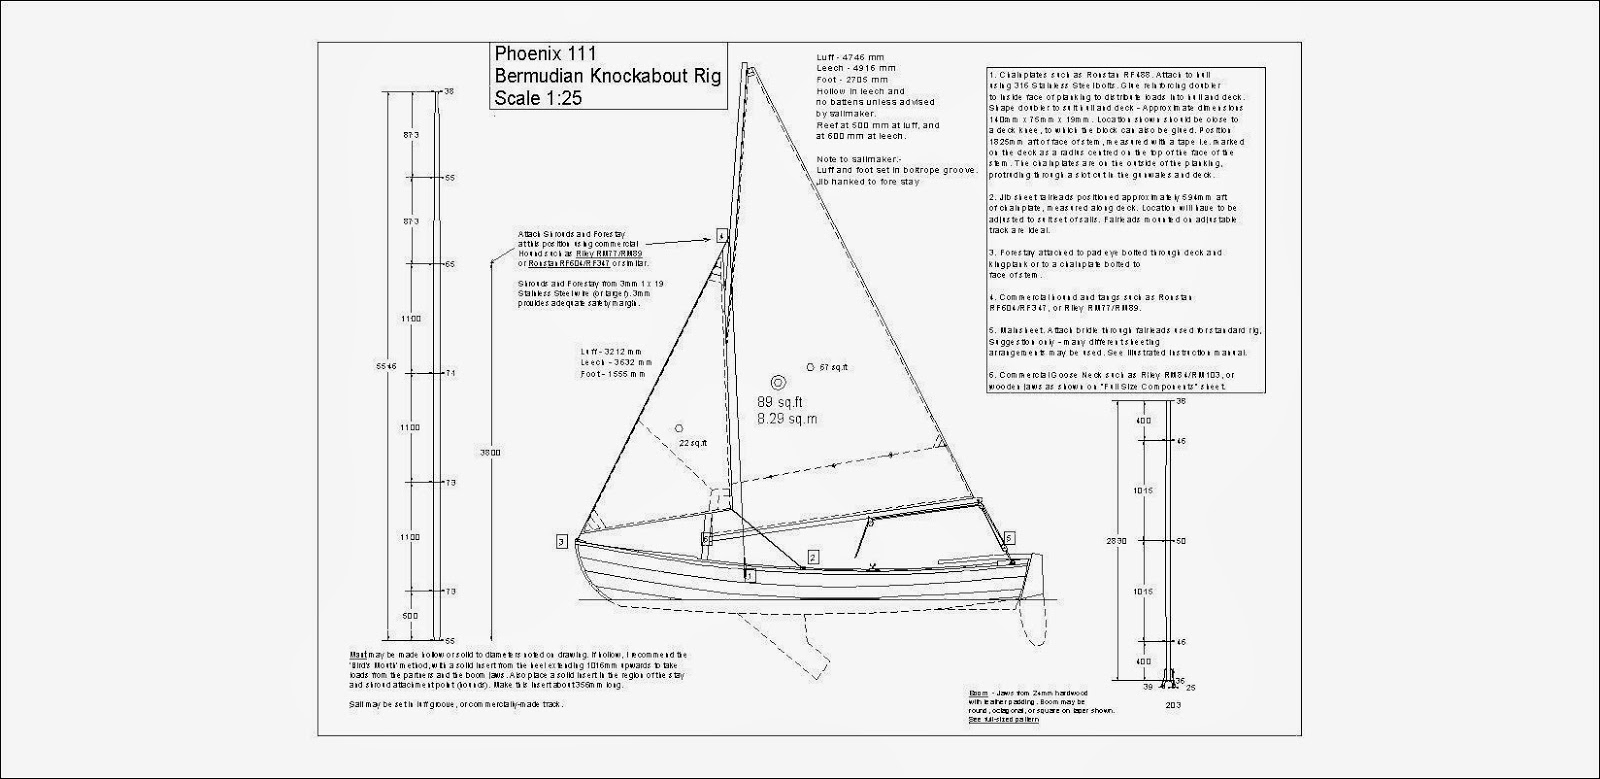 Here is a photo of Paul's experimental Poohduck Skiff rig. The sail